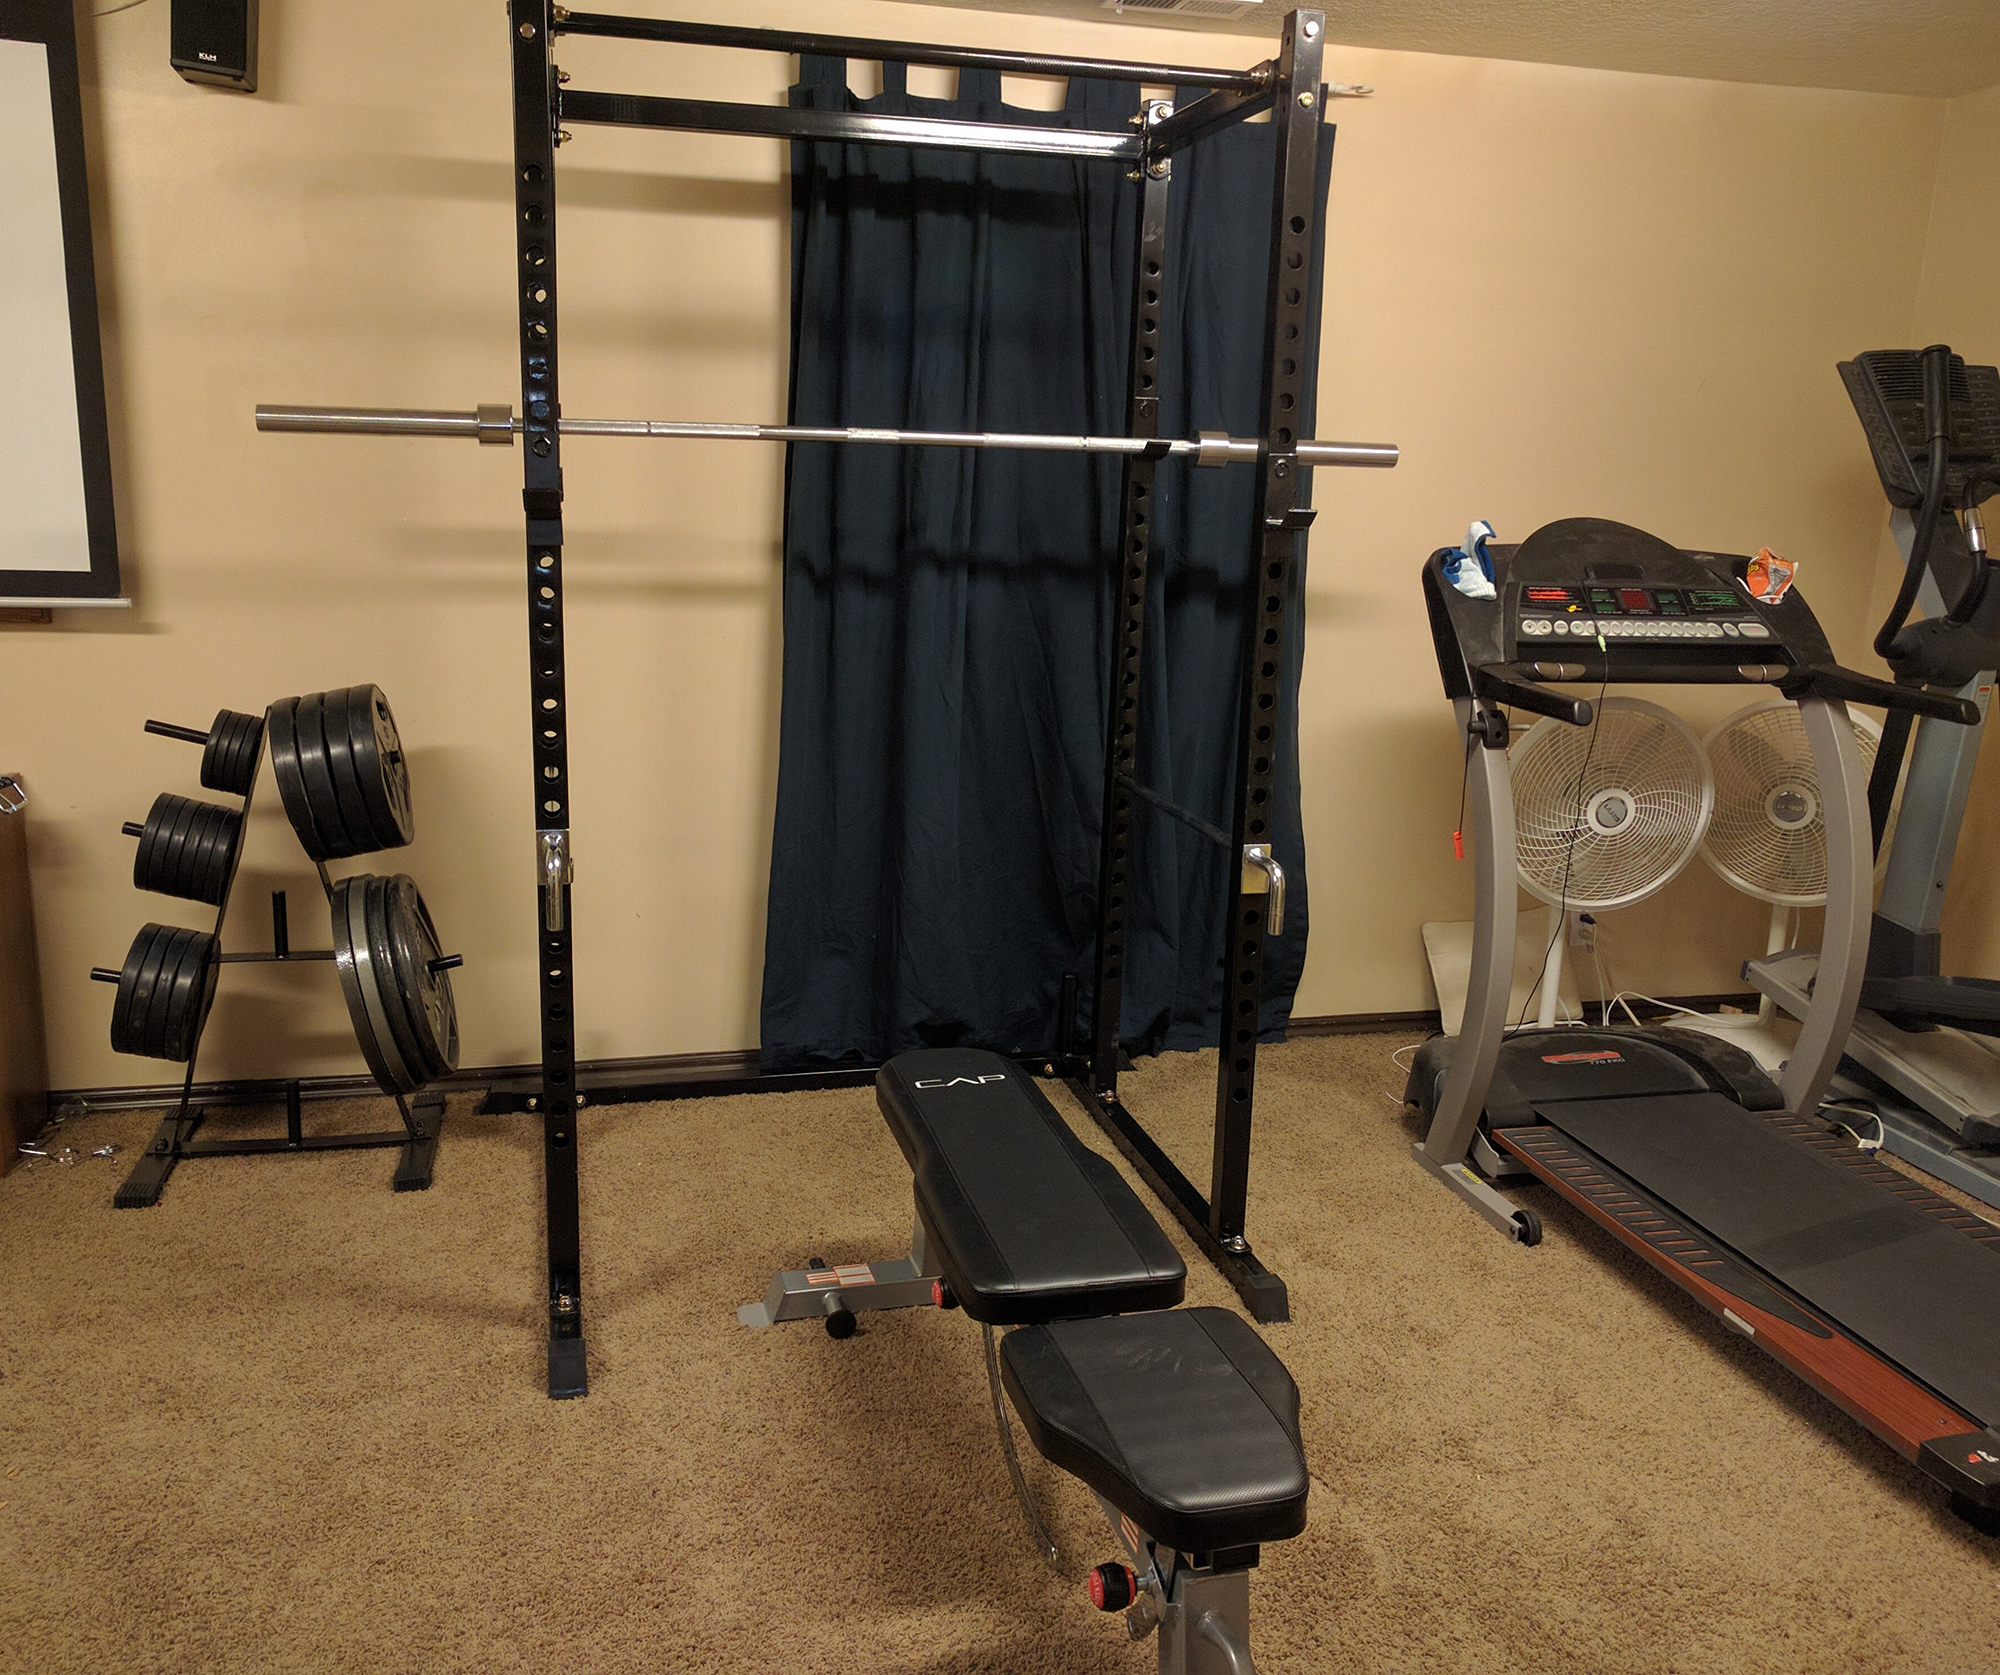 Power Rack arrived this morning